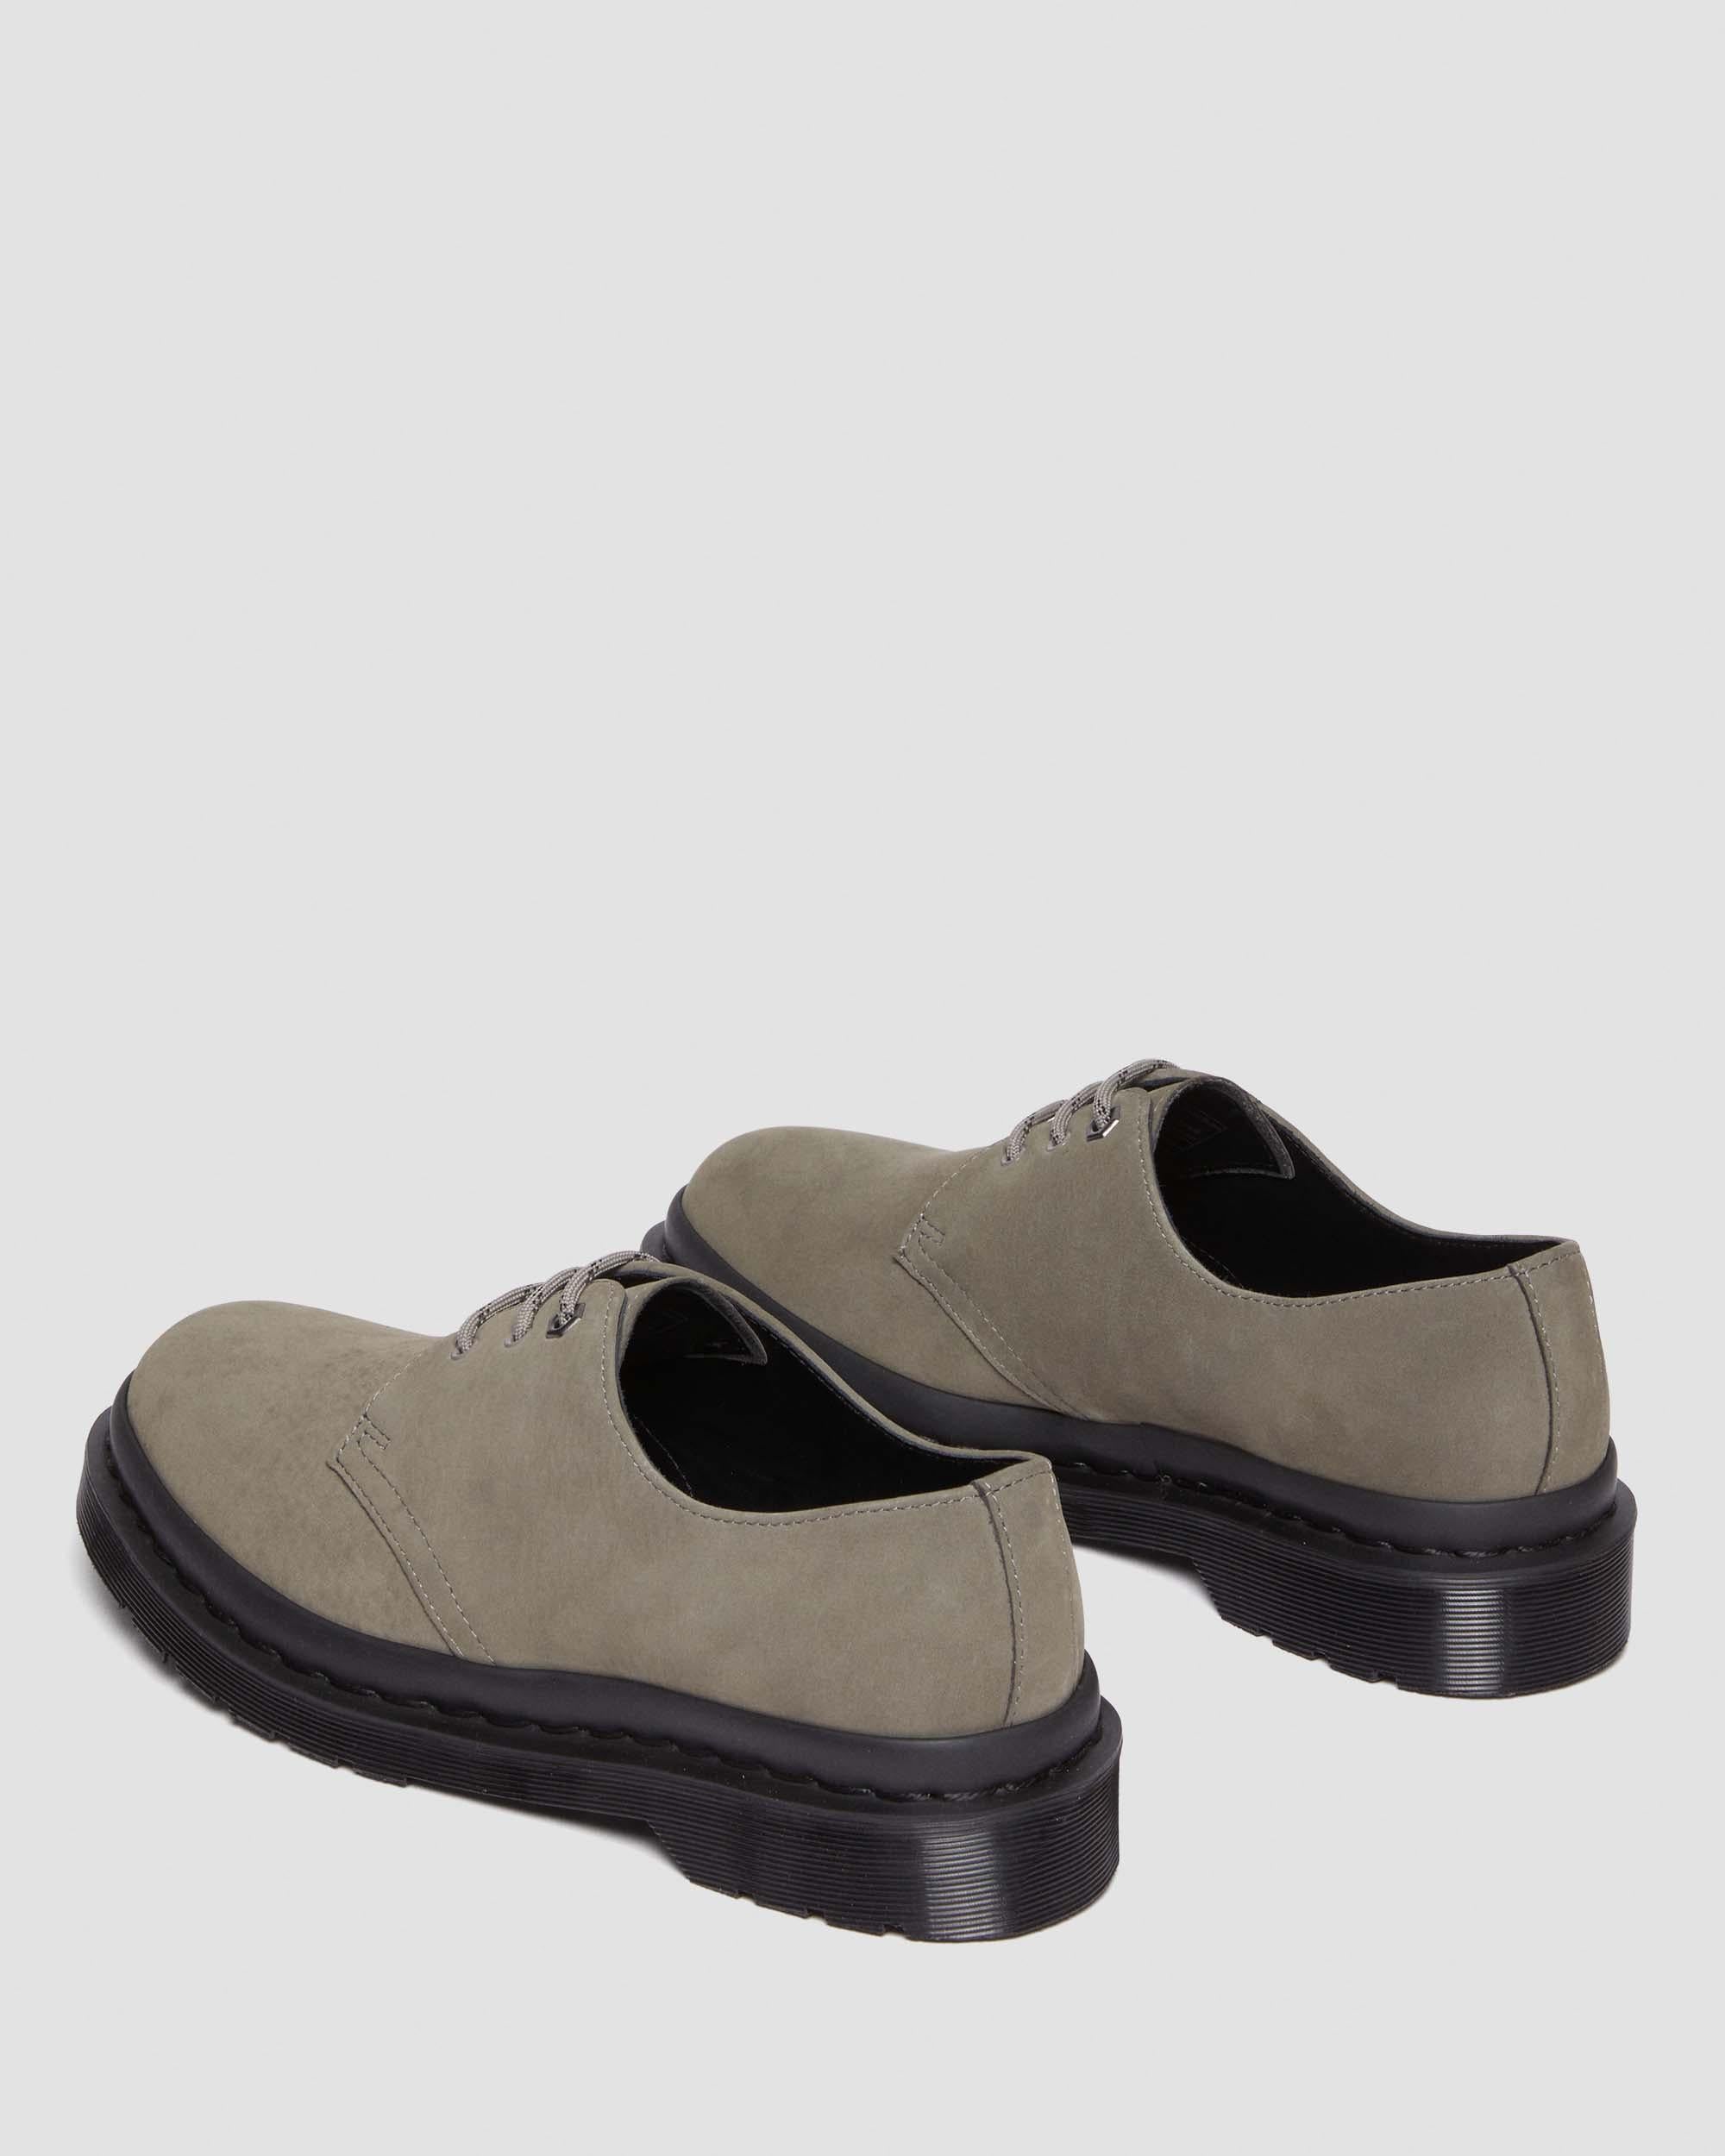 1461 Milled Nubuck Water-Resistant Leather Shoes